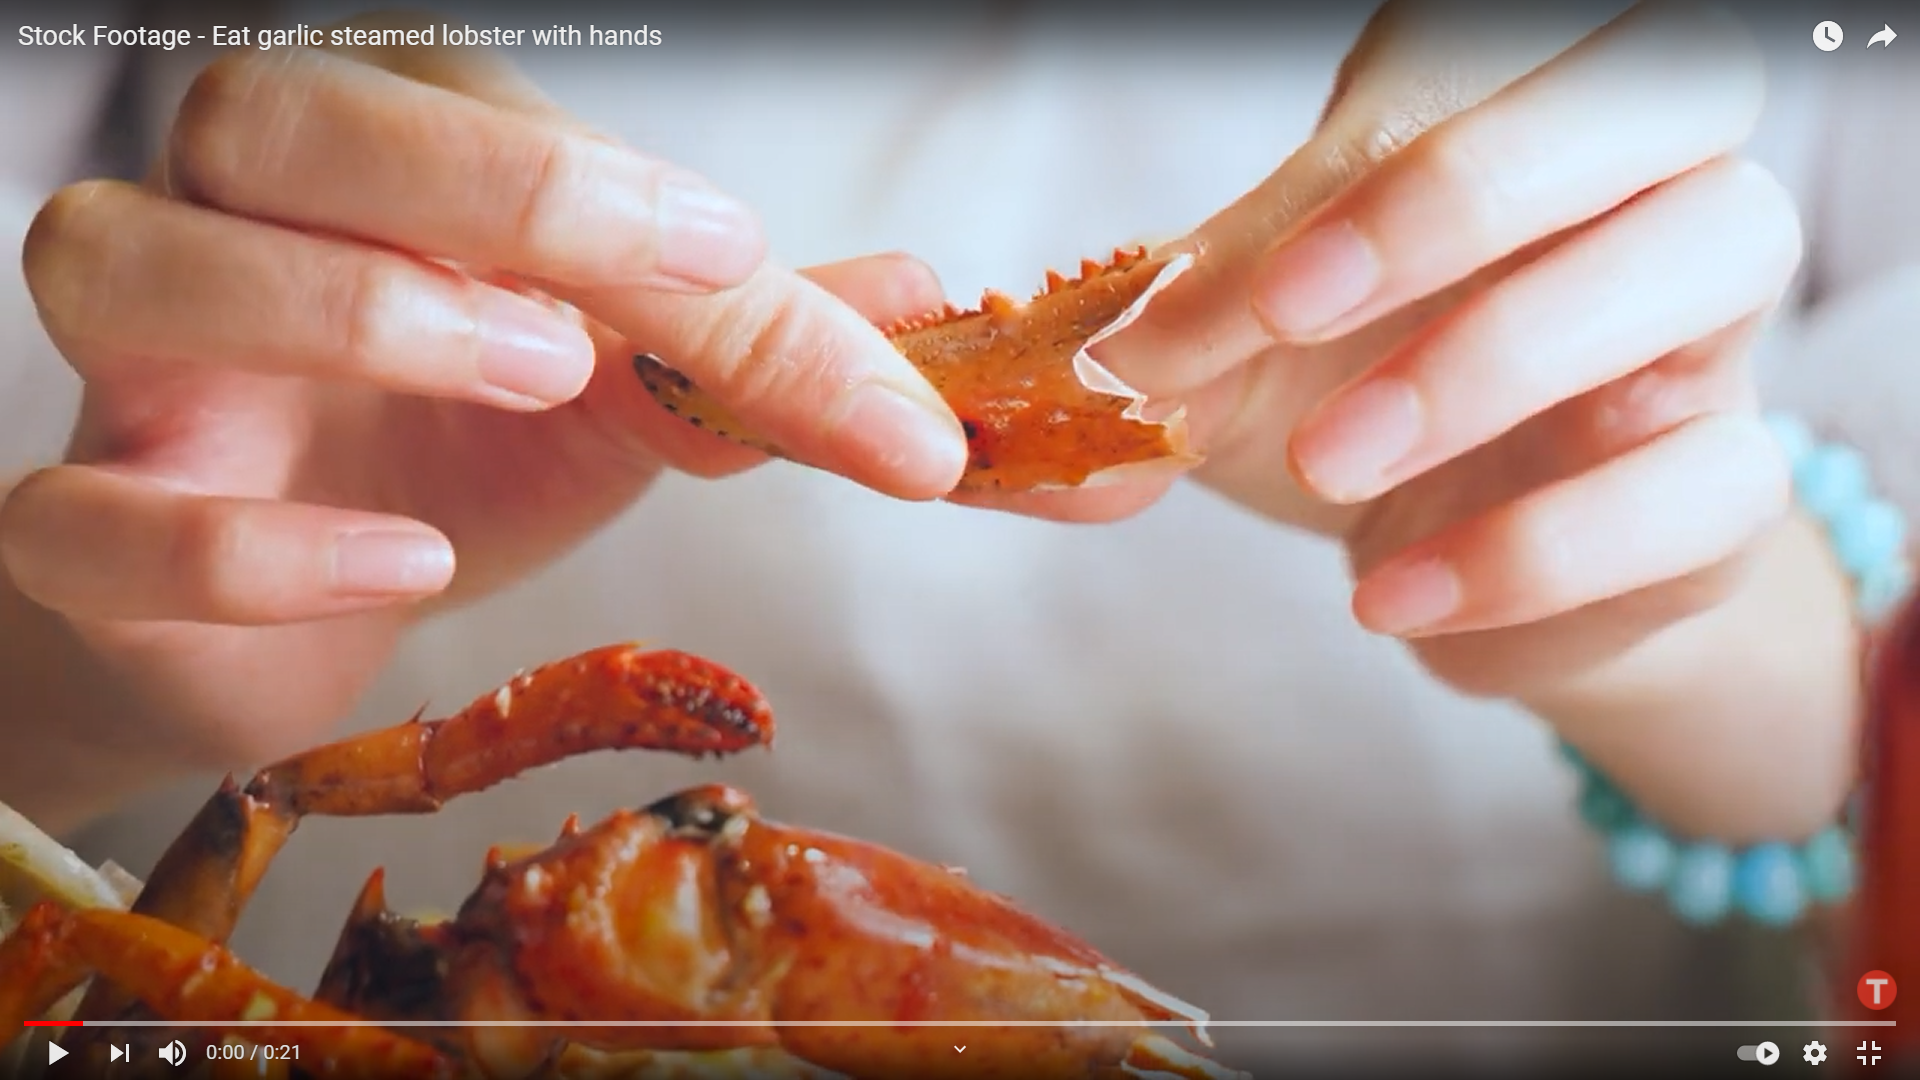 Stock Footage Eat garlic steamed lobster with hands